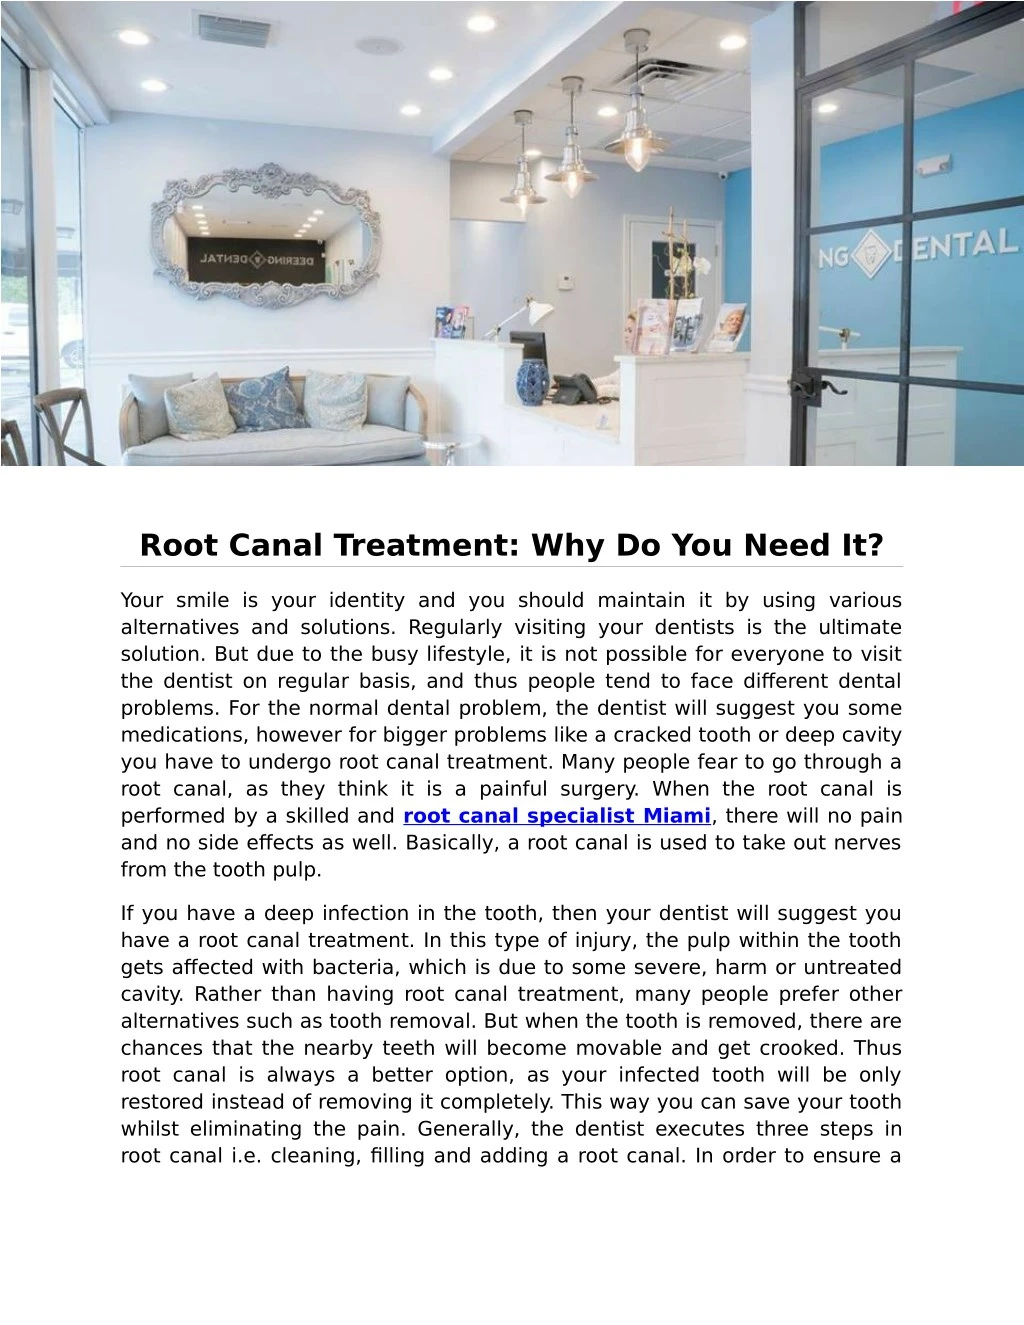 root canal treatment why do you need it